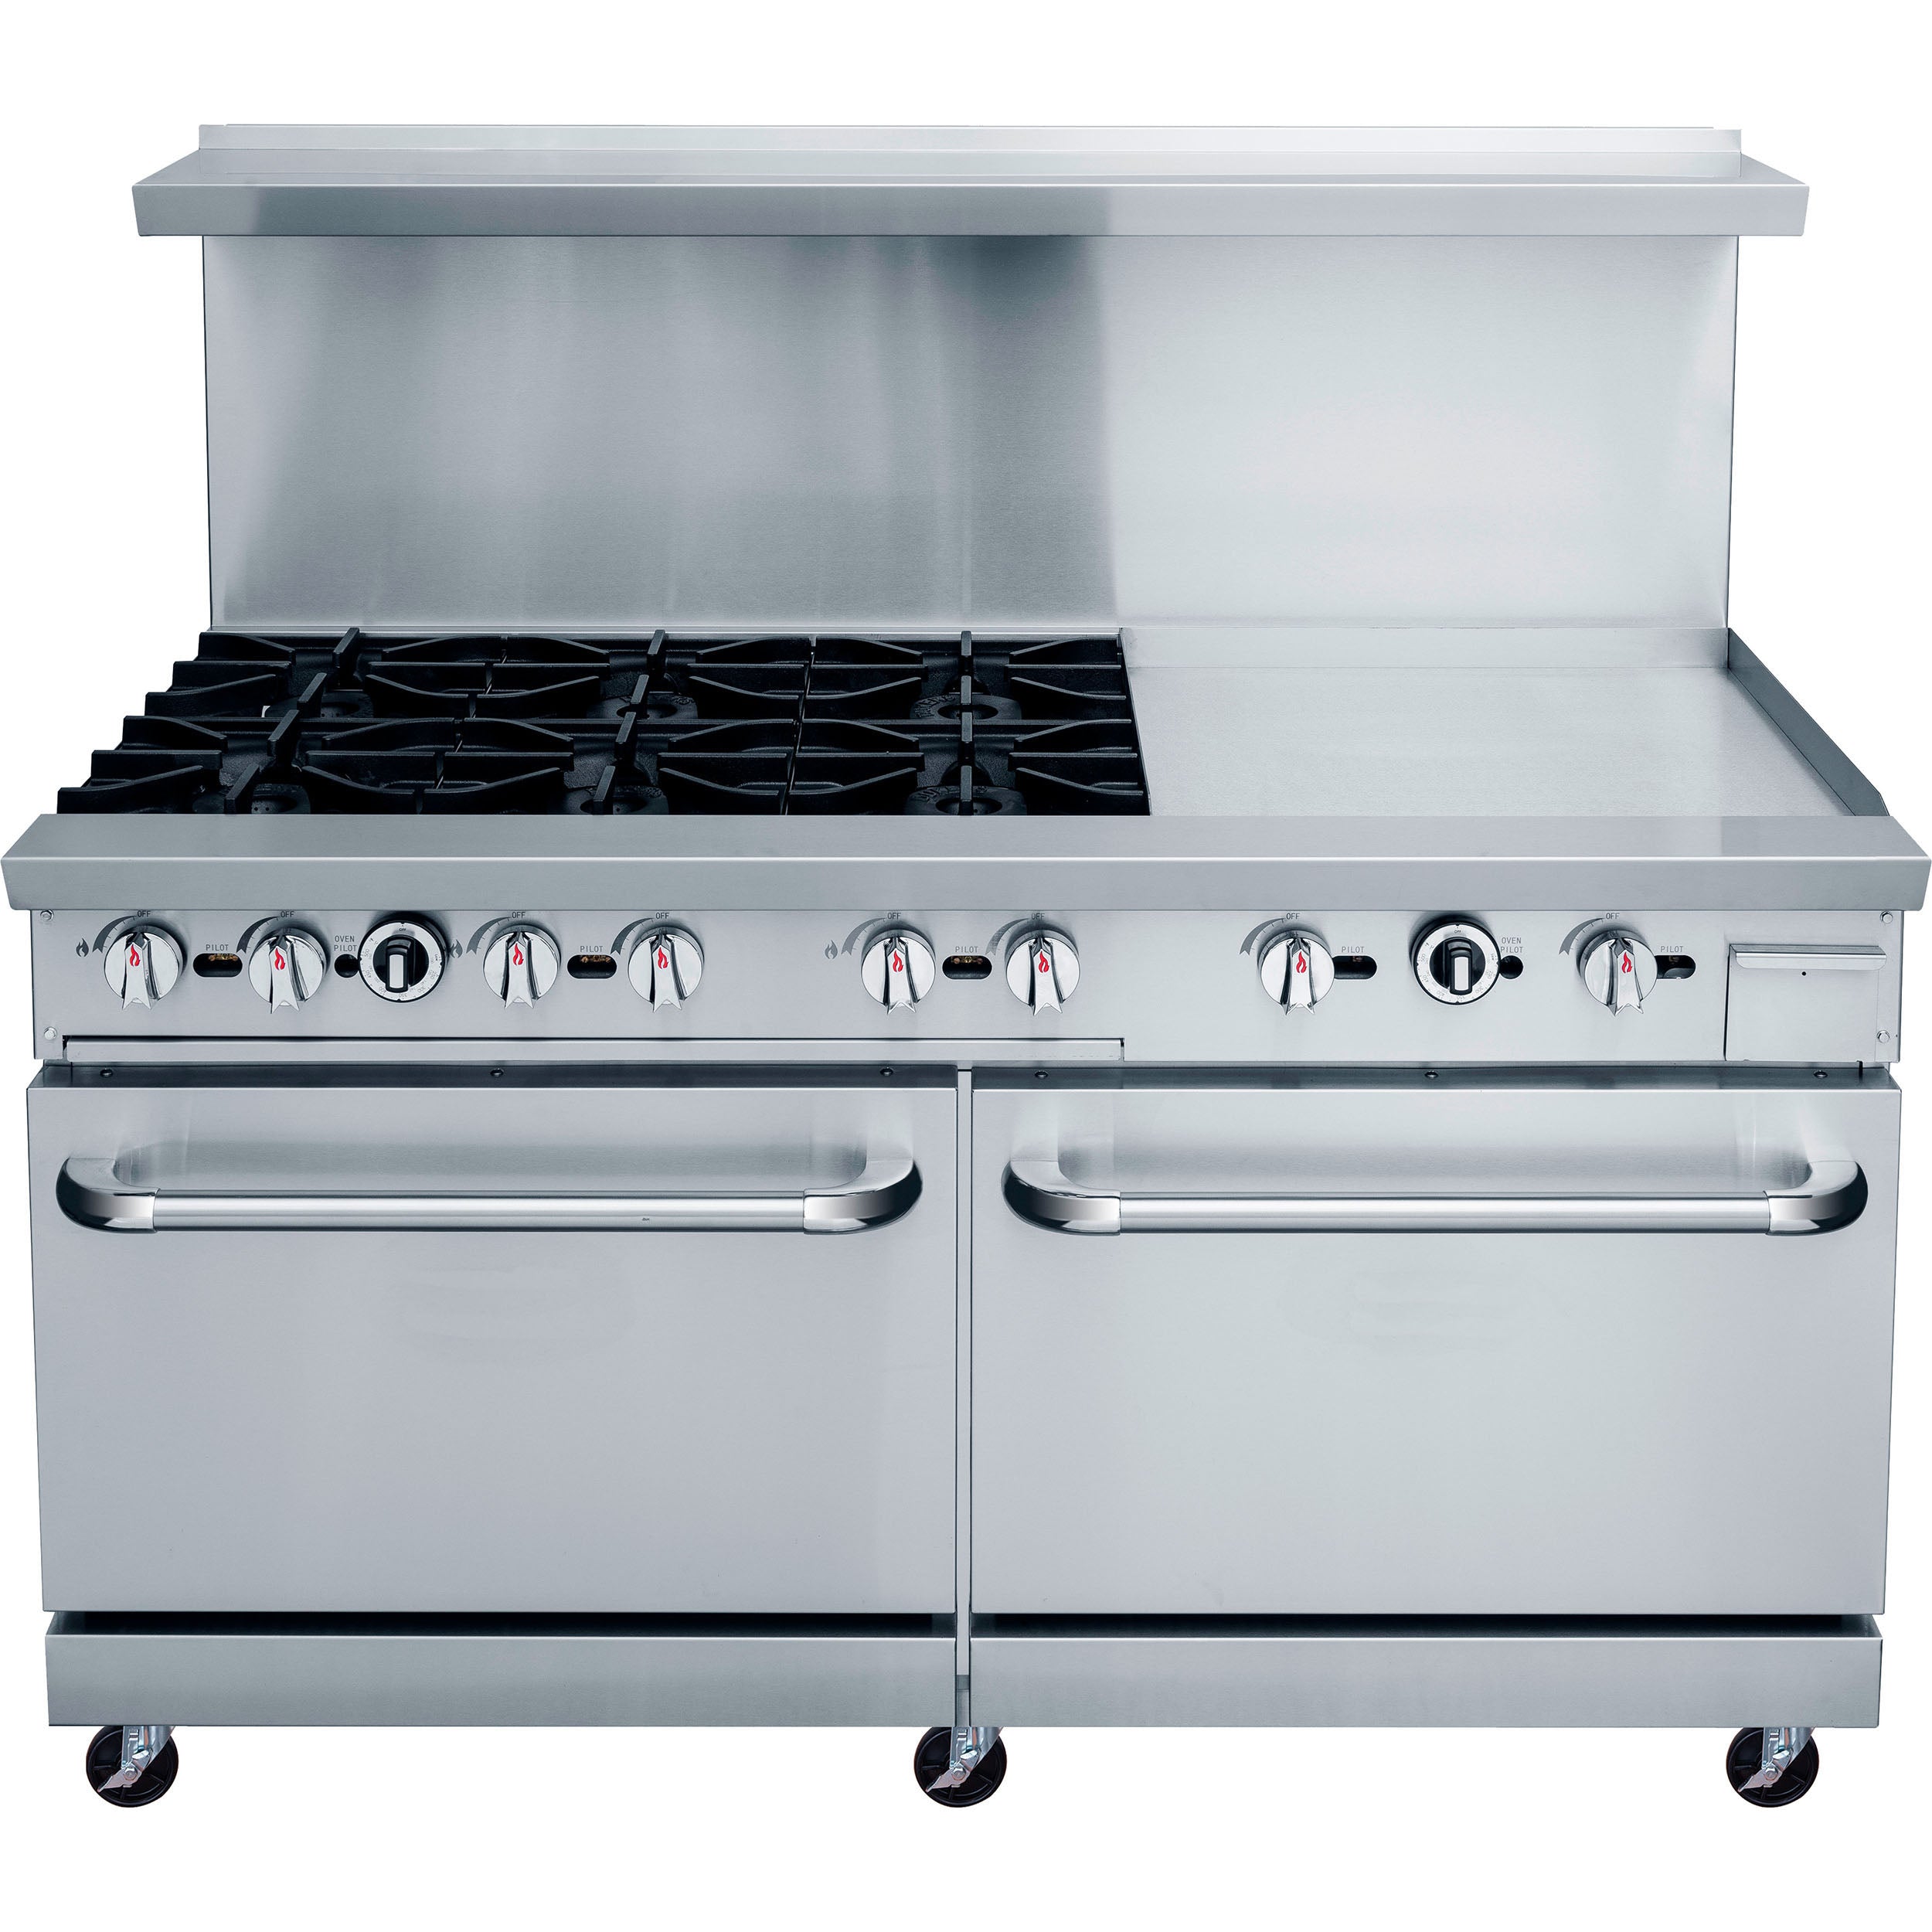 Chef AAA - TCR60-6B24GM-NG, Commercial 60" Oven Range Six Open Burner with 24" Griddle Natural Gas